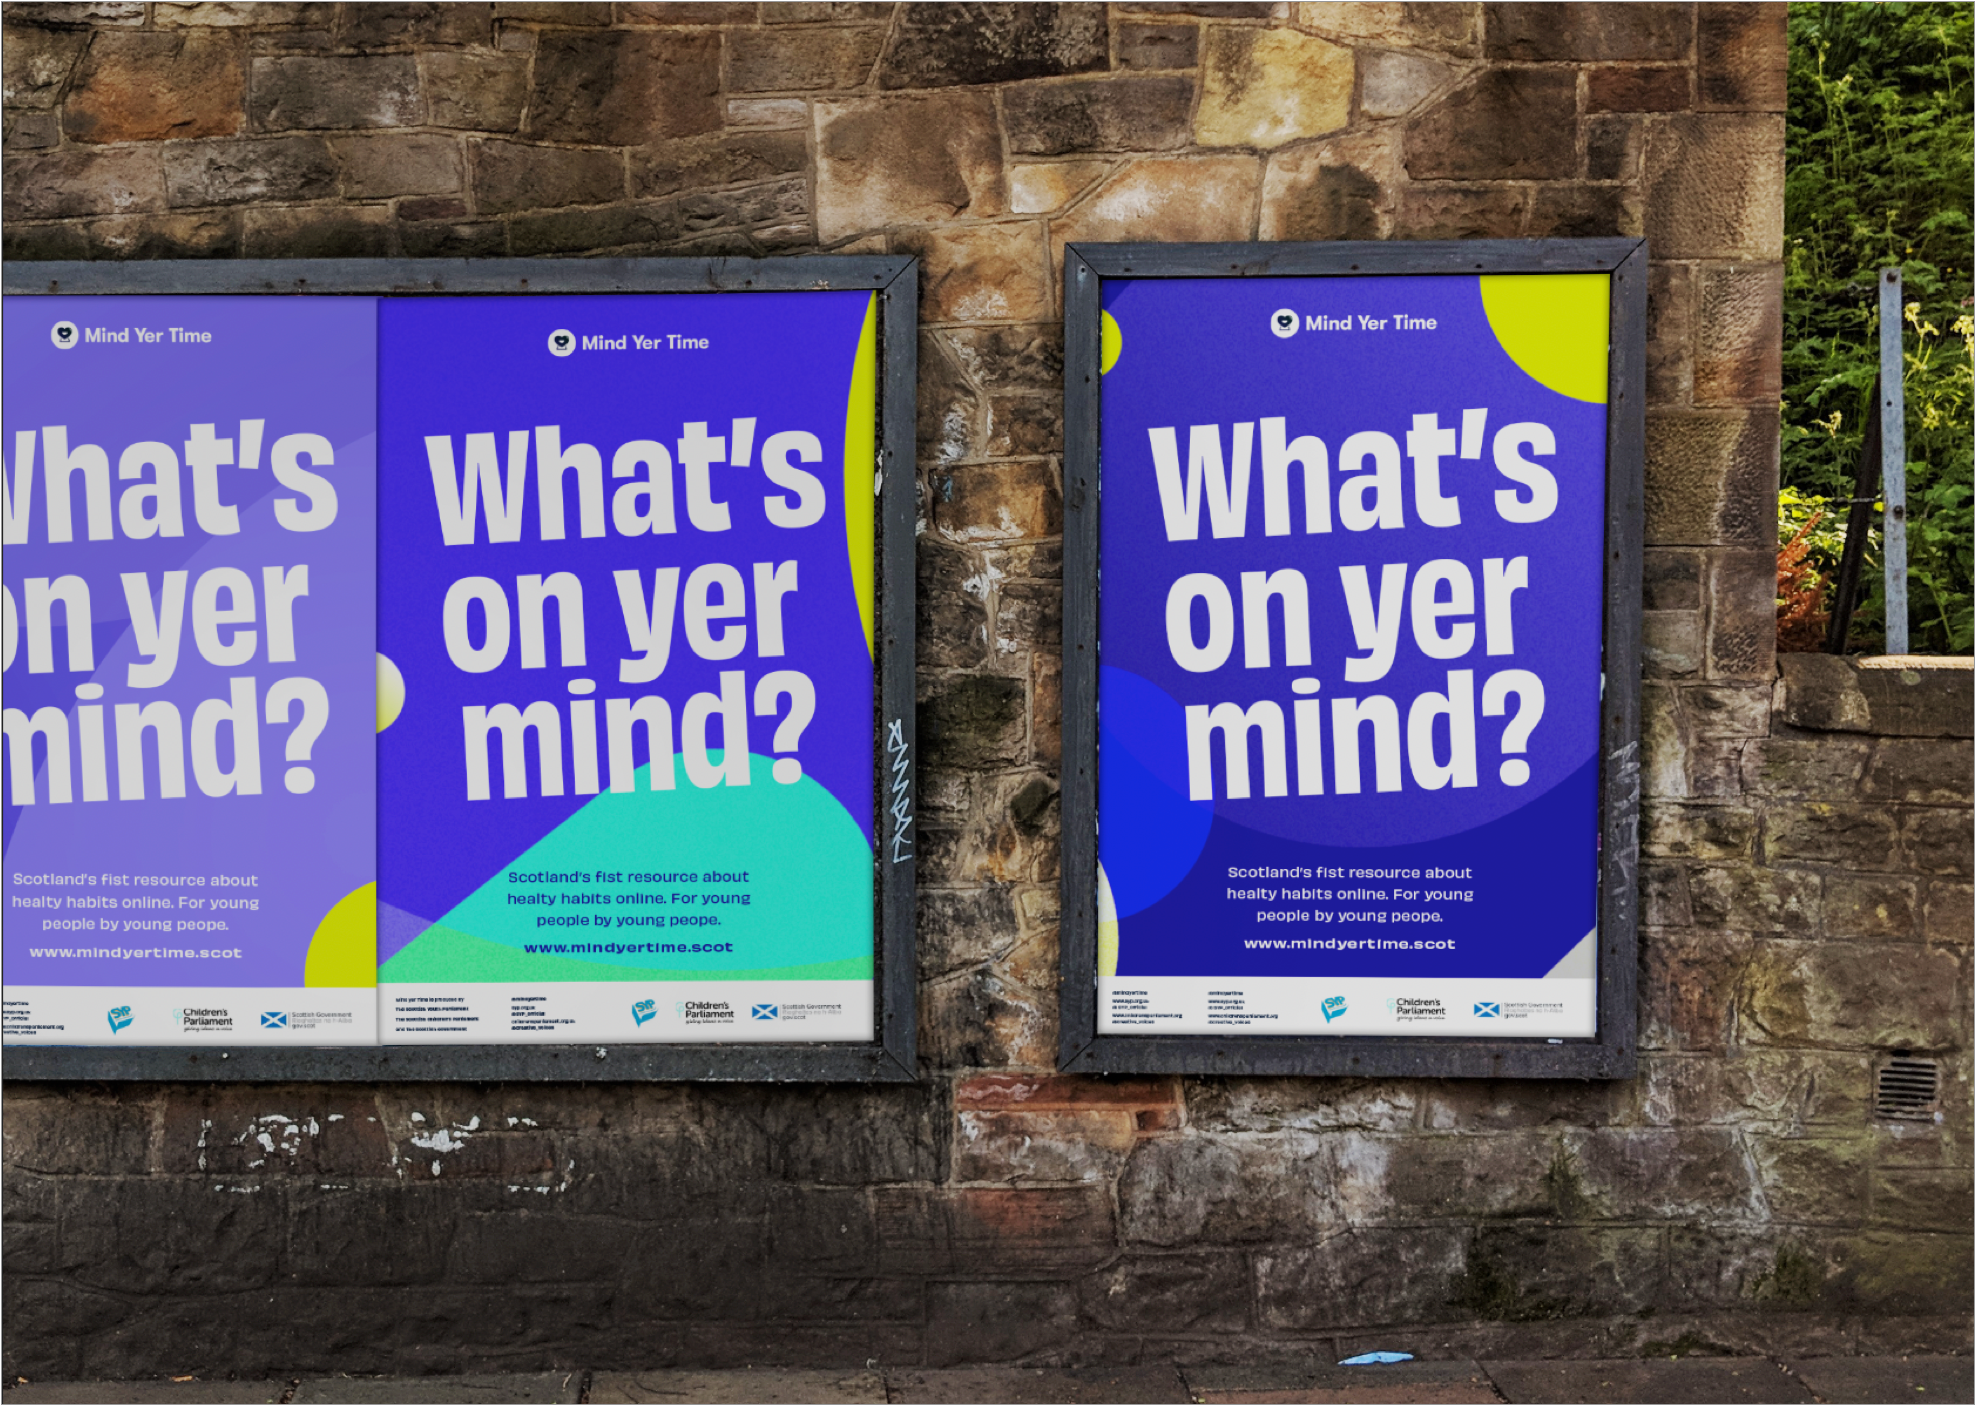 Three “What’s on yer mind?” street posters